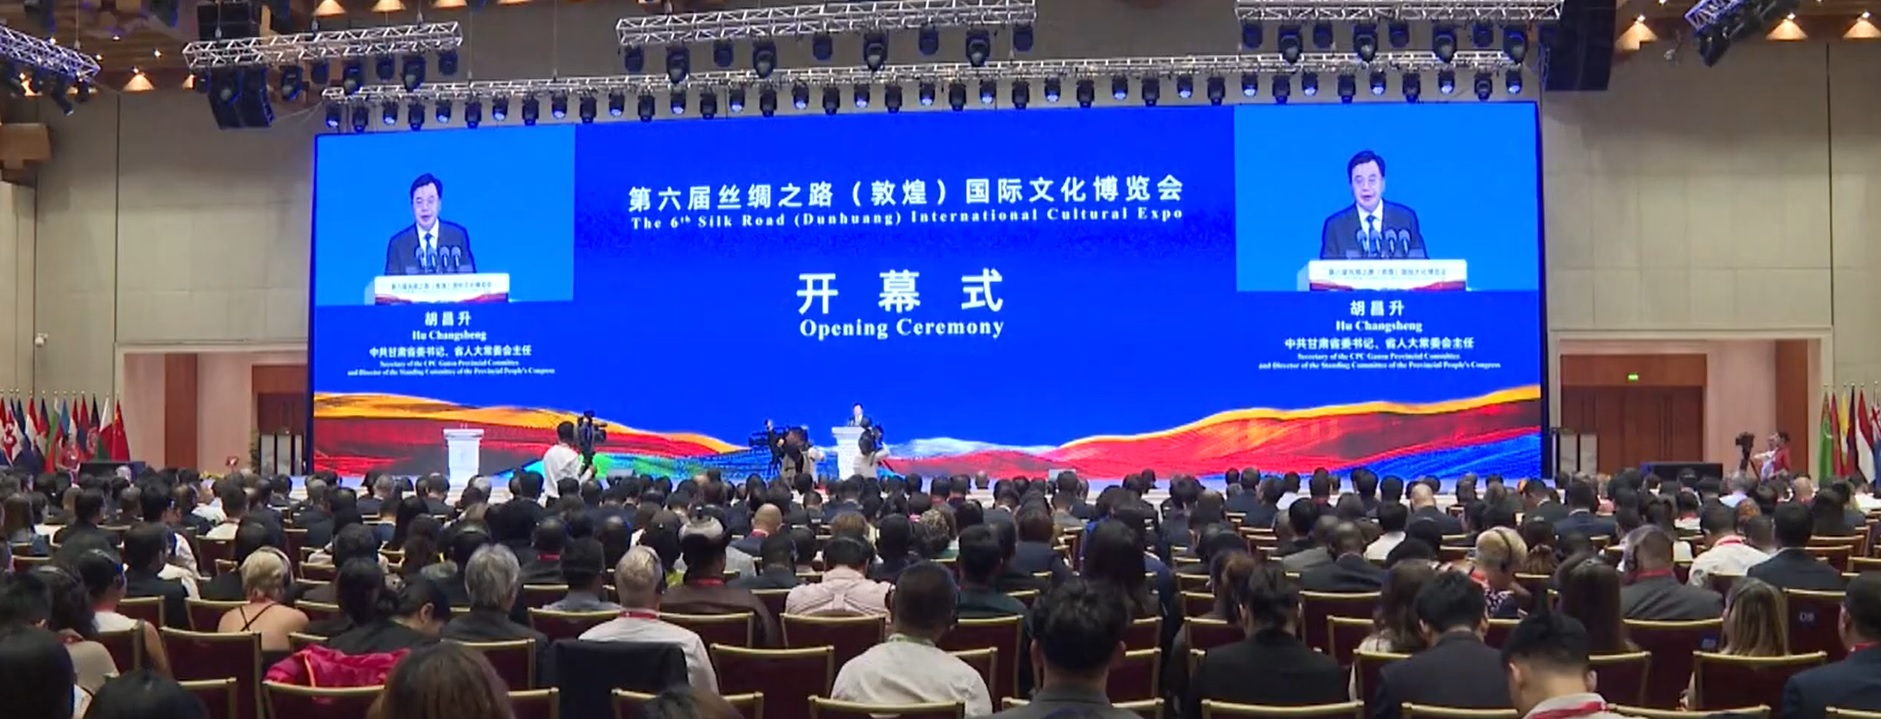 The 6th Silk Road (Dunhuang) International Cultural Expo opened in Dunhuang, Gansu Province, on Wednesday.  The event focuses on the essence of Silk Road culture, developing people-to-people exchanges and how best to preserve local traditions and heritages./CGTN.